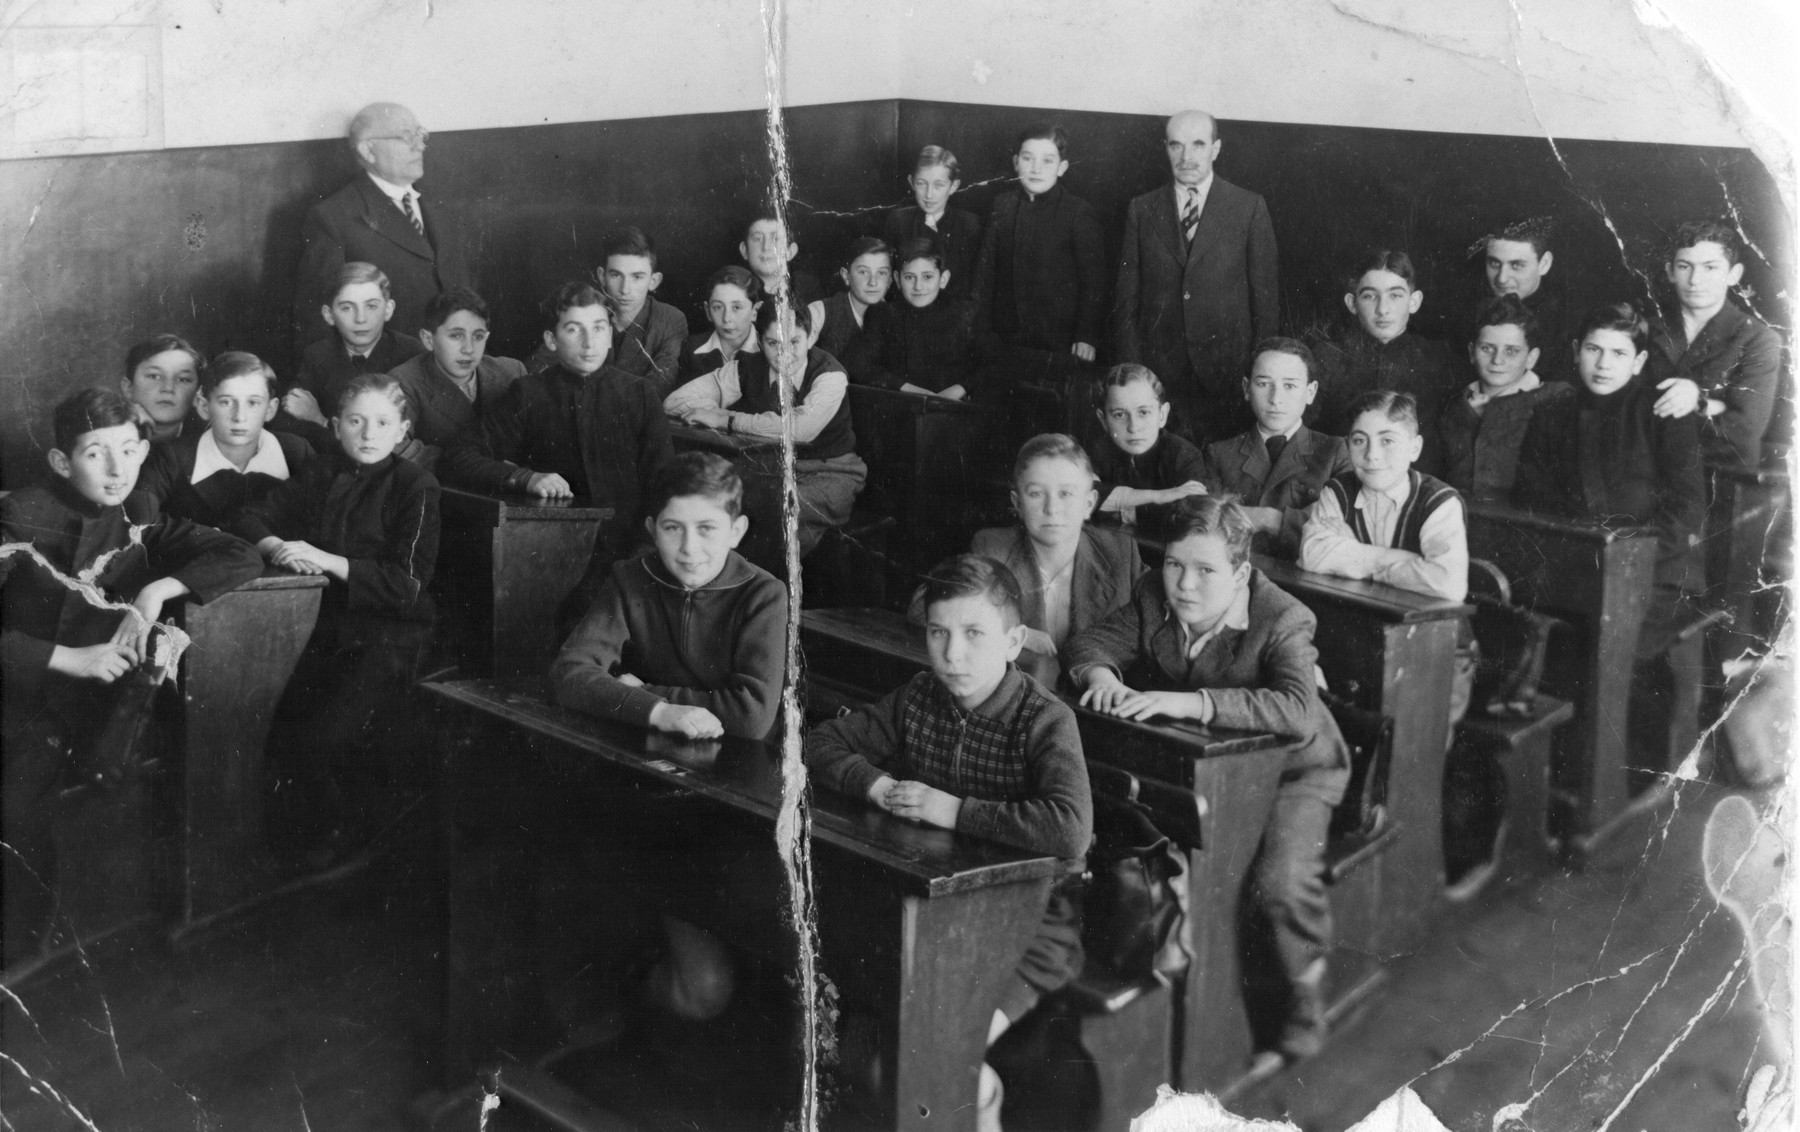 Class of the Real Hebrew Gymnasium, the first Hebrew high school in Kaunas.  

Mr. Dumblansky, the Hebrew teacher, stands in the back of the room.  Those seated include Zev Birger, Fima Strom, Micklishansky, Memko Rubin, and Motke Fischer.